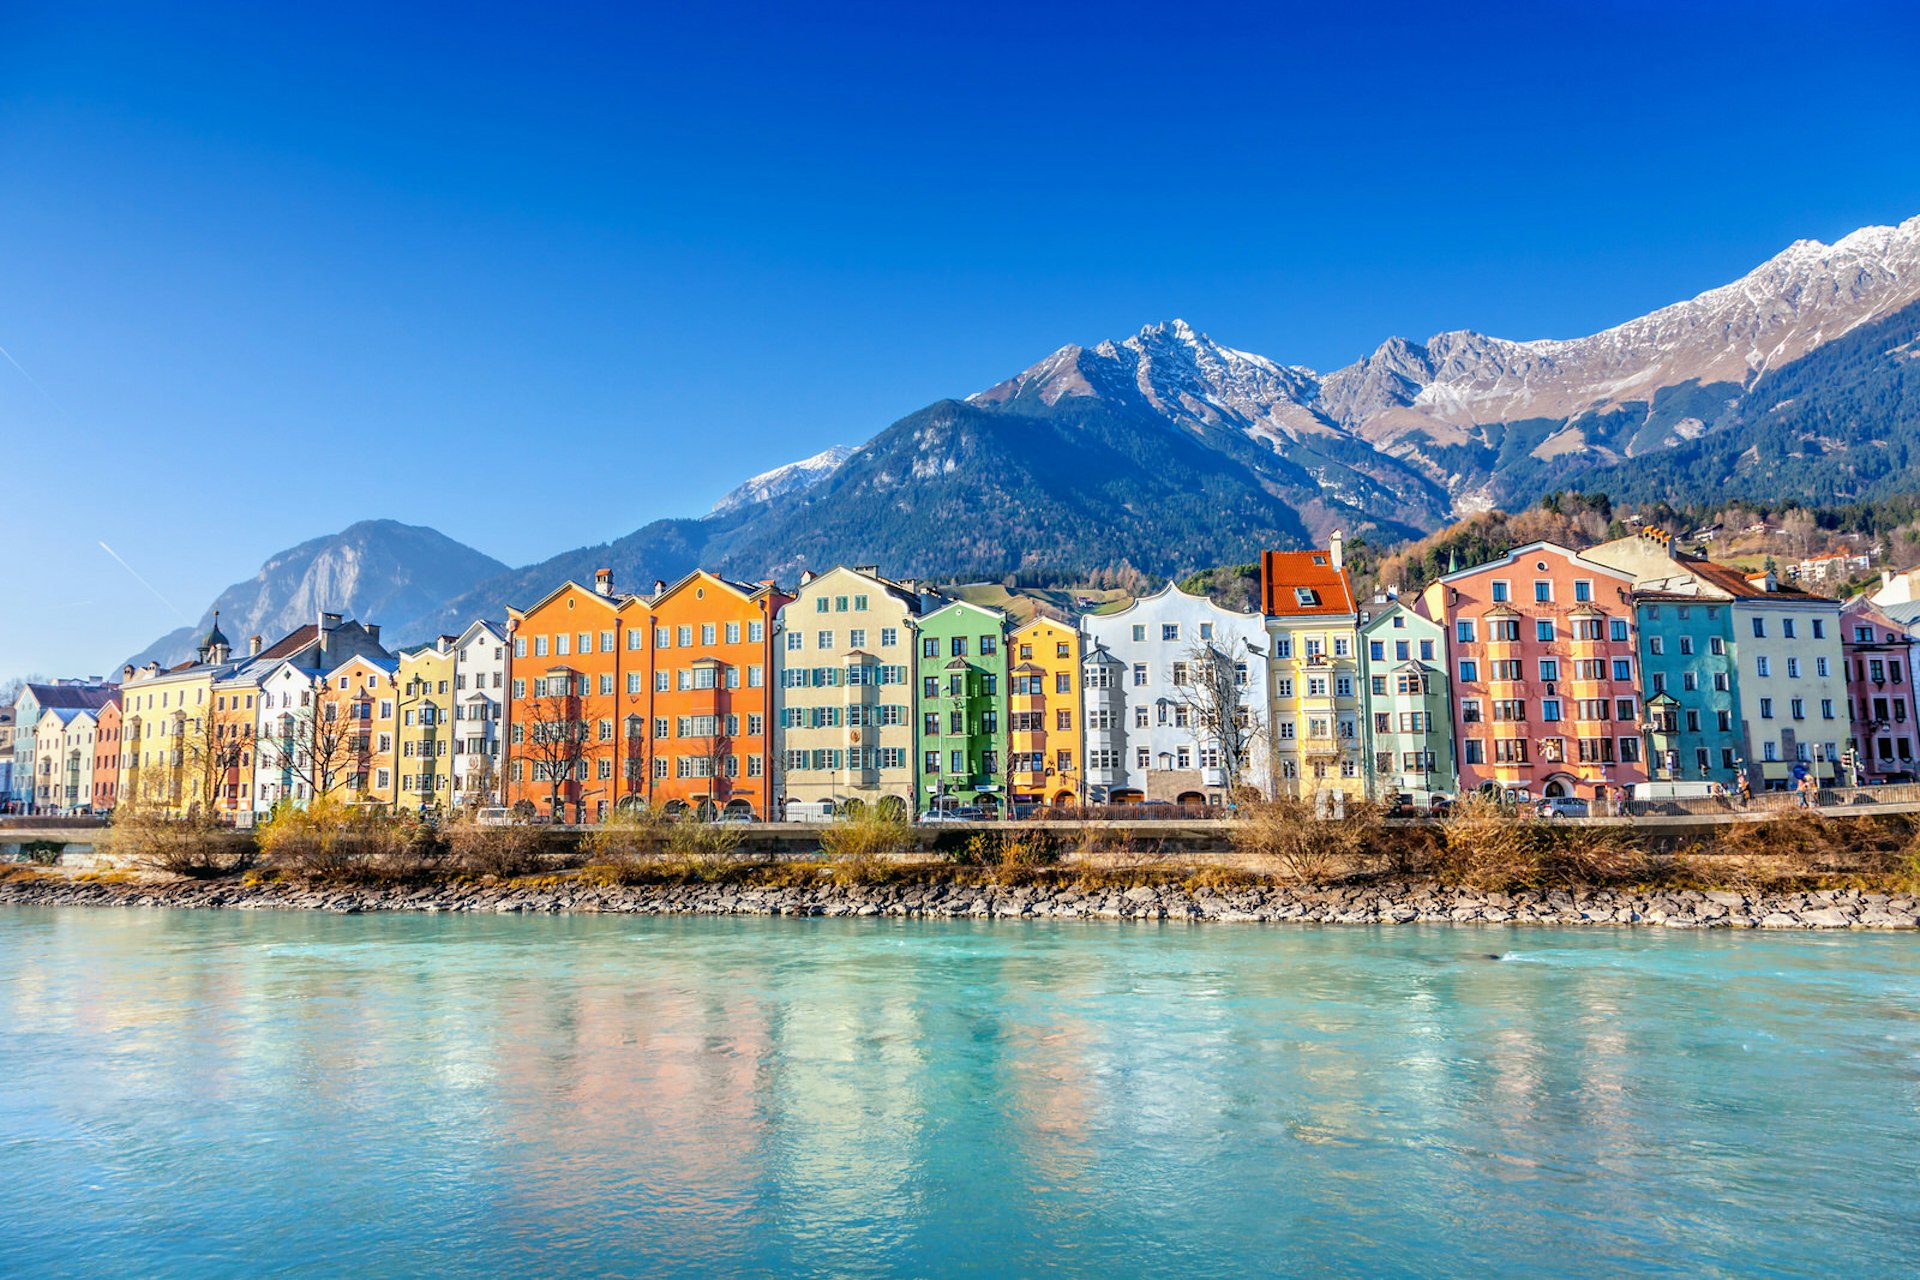 The colourful houses of Innsbruck sit on the river Inn, with the snow-capped Nordkette mountains rising behind